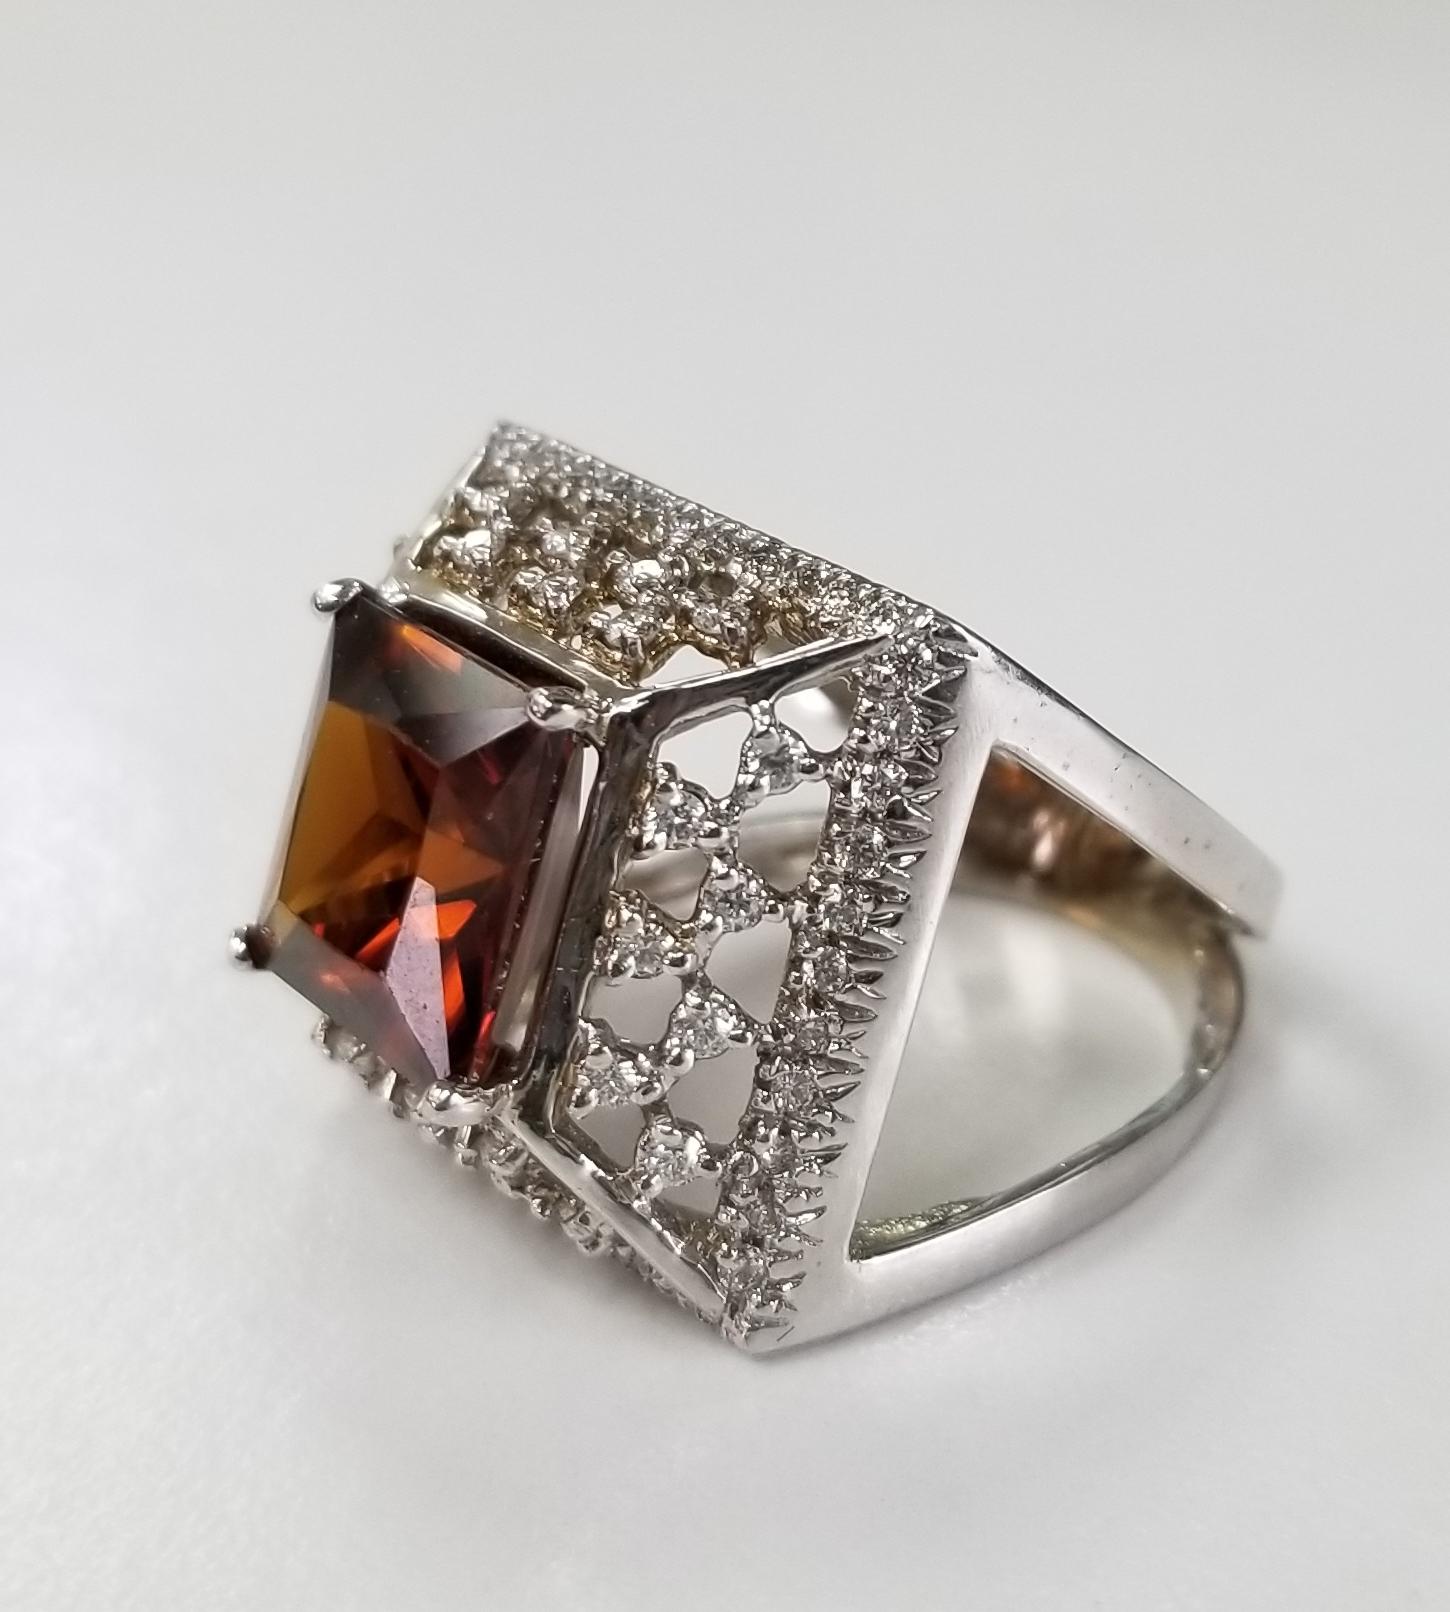 14k white gold Garnet and diamond ring, containing 1 square cut garnet weighing 6.25cts. and 72 round full cut diamonds of very fine quality weighing .70pts. set in a tiered setting.  This ring is a size 6.5 but we will size to fit for free.